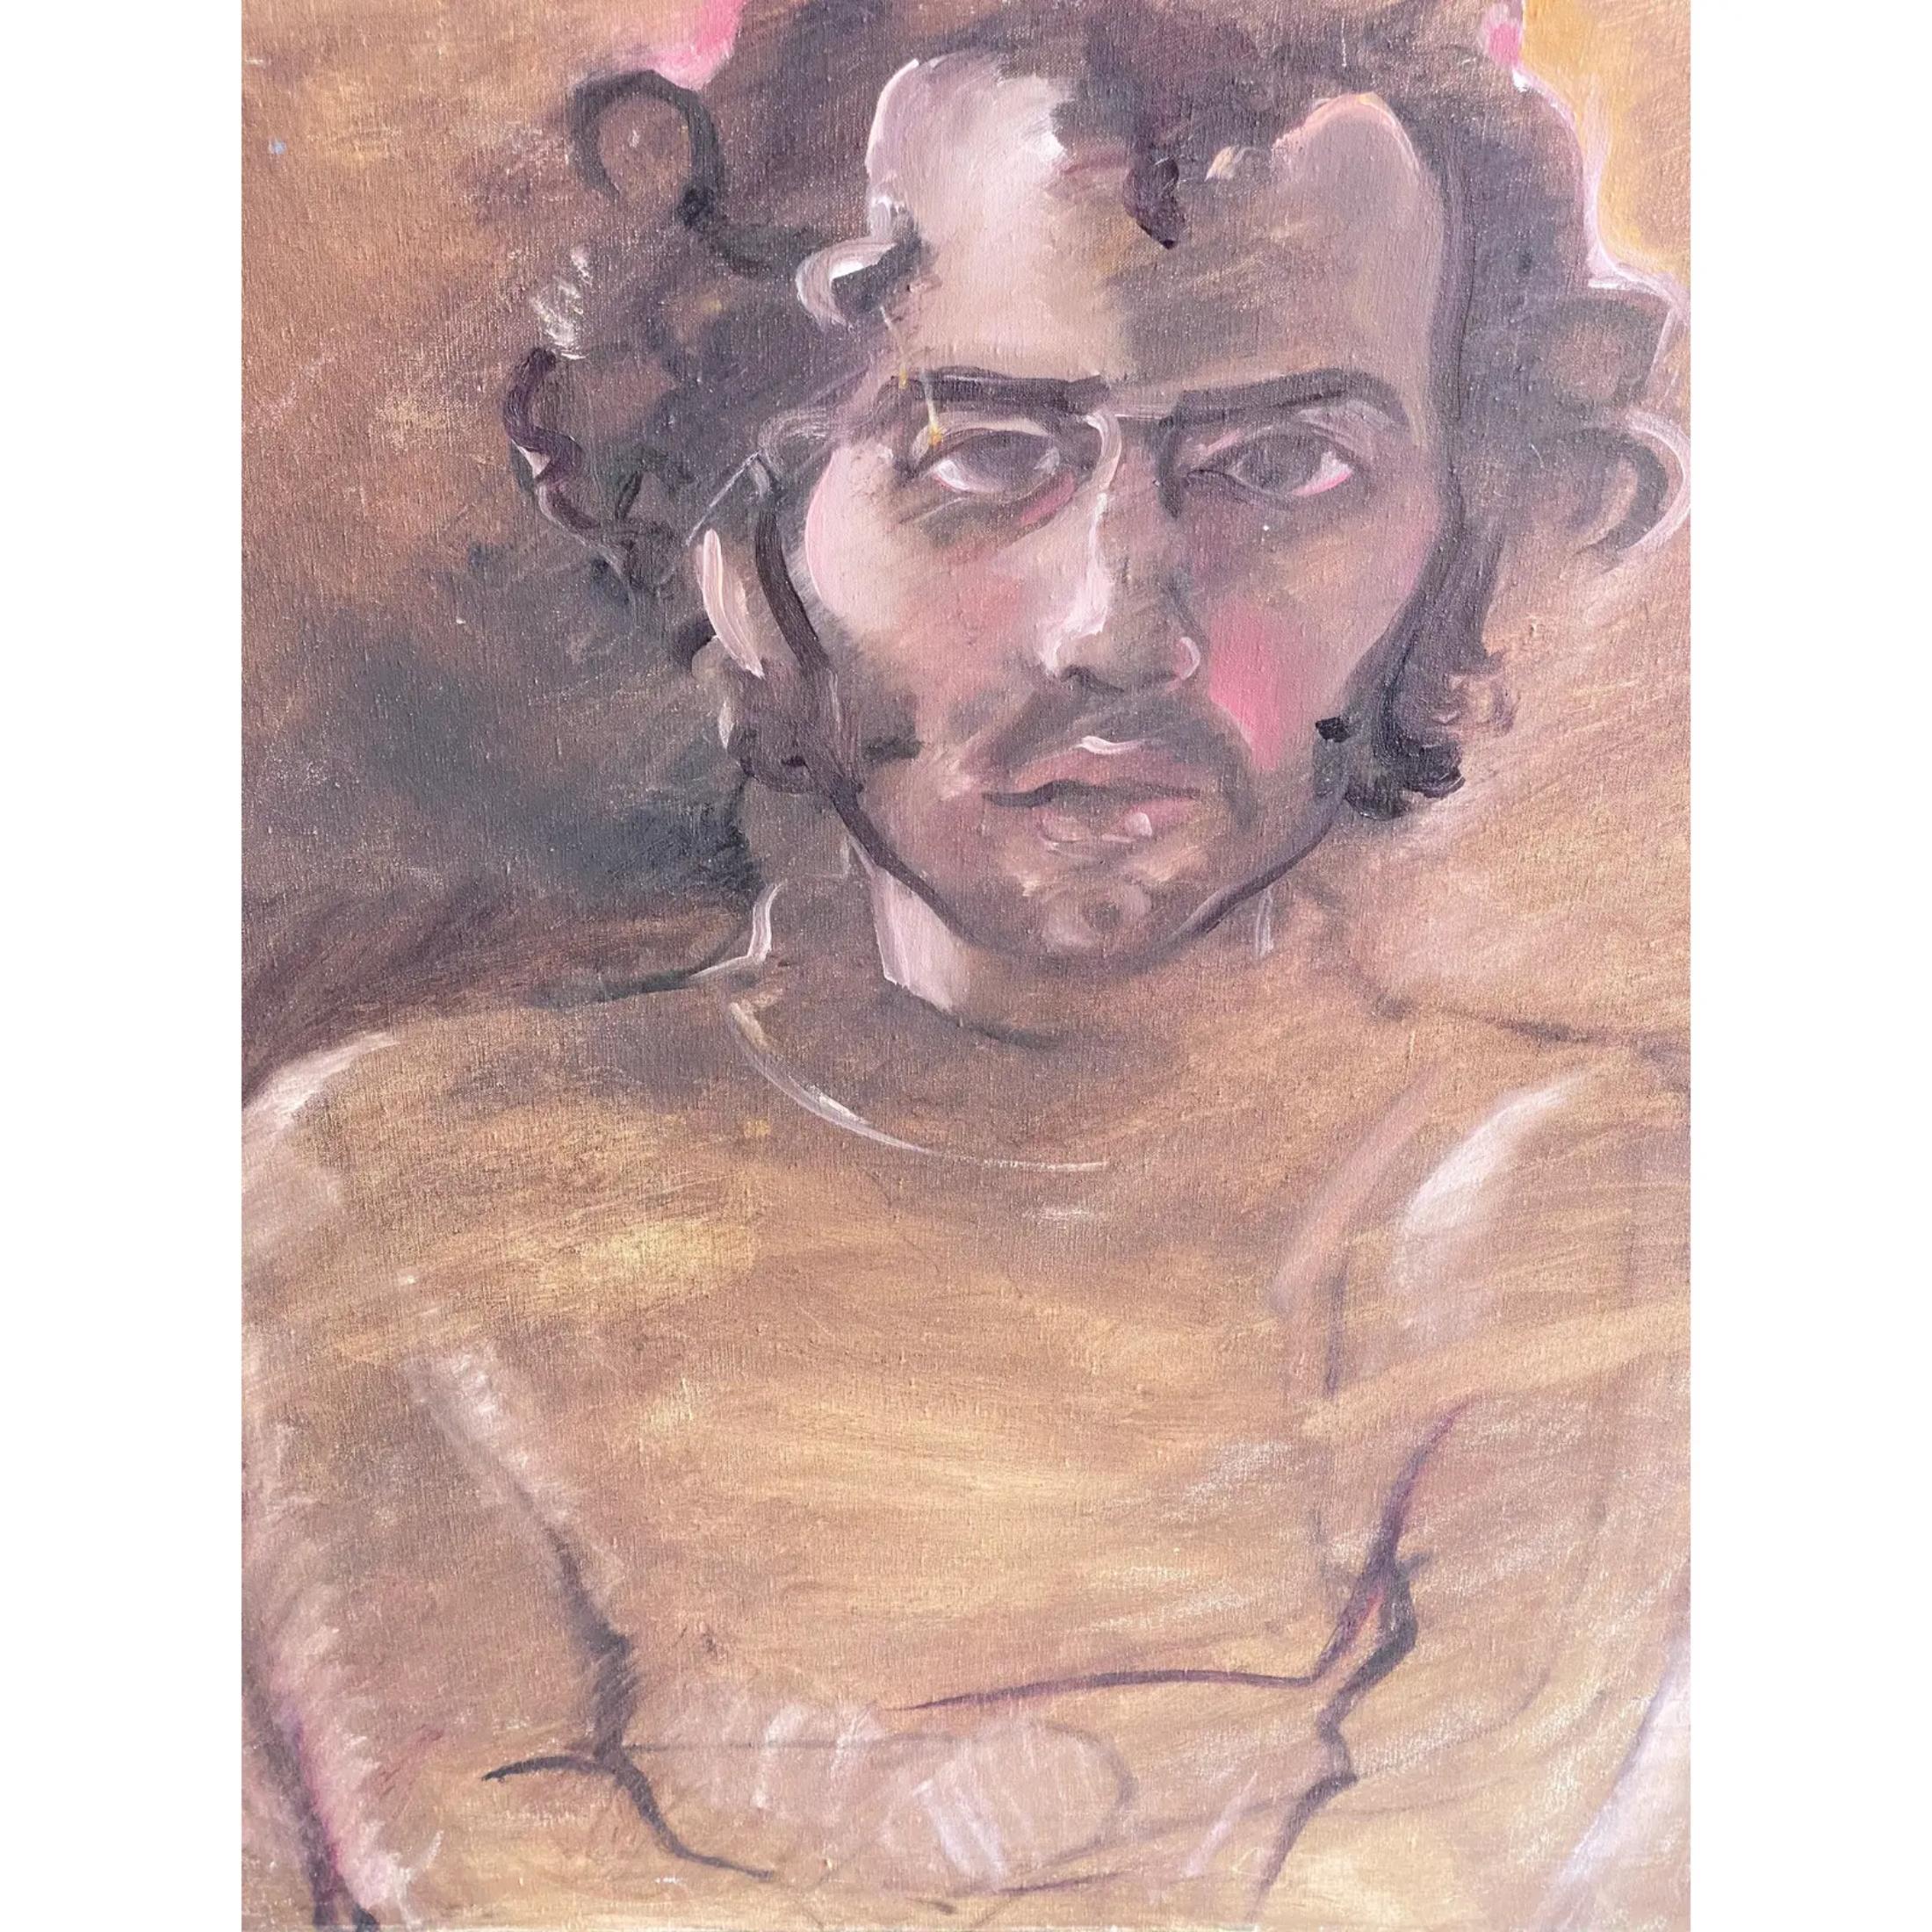 Beautiful signed oil portrait of young man. Done by the artist Regone Pierokkis. Gorgeous soft colors dominate this portrait. Acquired from the artist’s estate.